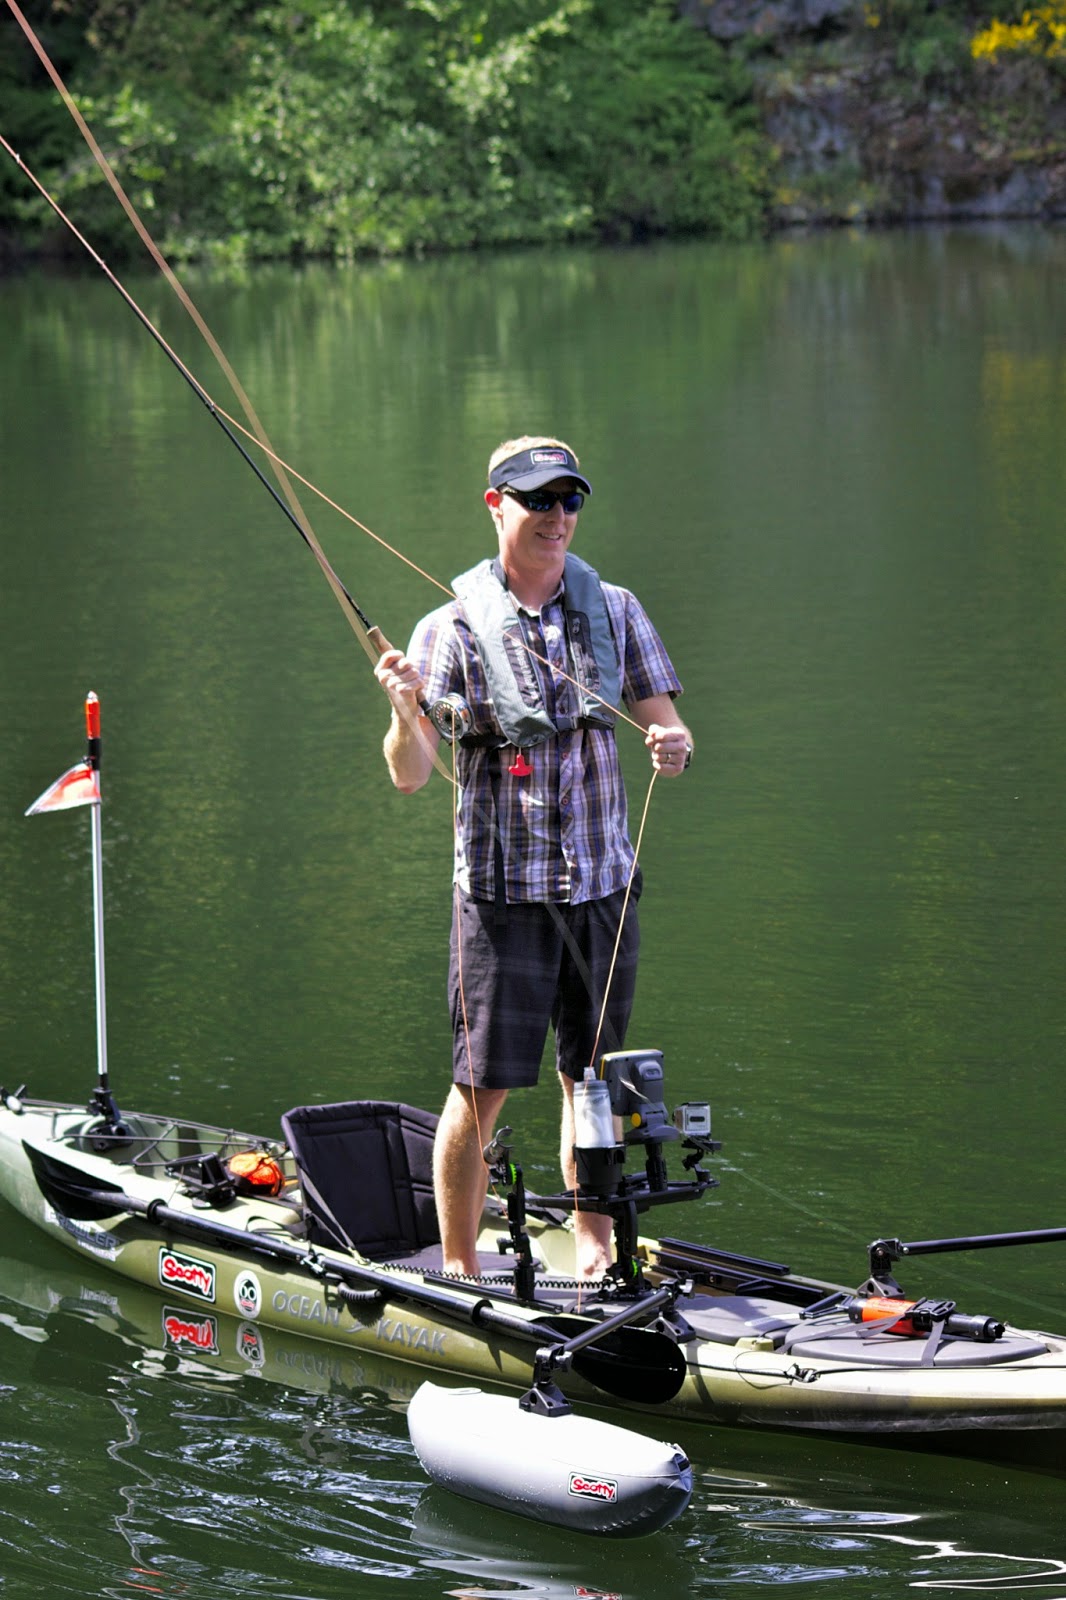 Scotty Fishing Products: GEAR REVIEW: No. 302 Scotty Stabilizers